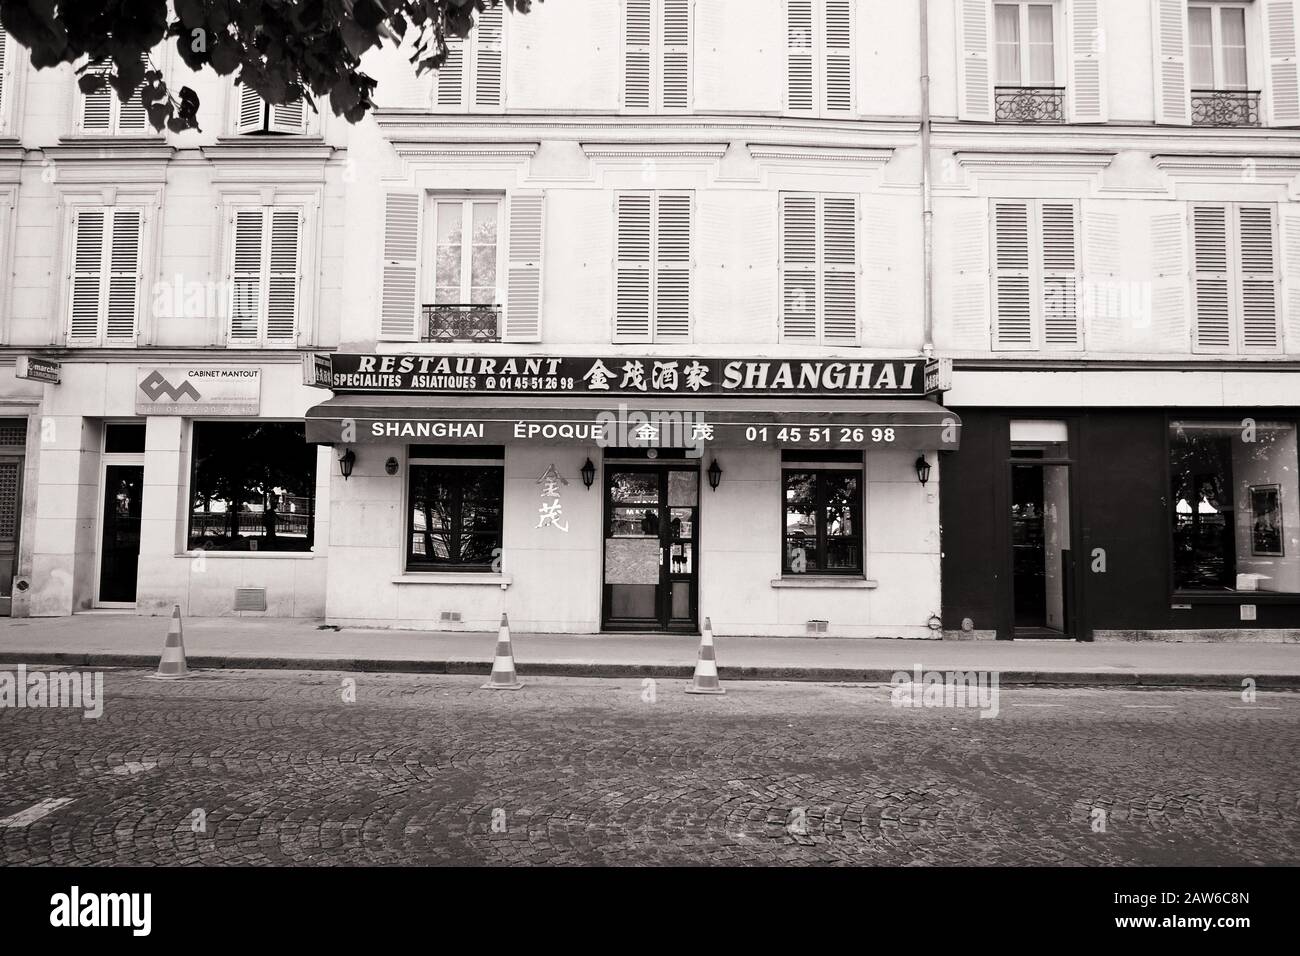 Shanghai Epoque Chinese Restaurant, Faubourg Saint-Germain, Paris - photographed in black and white Stock Photo